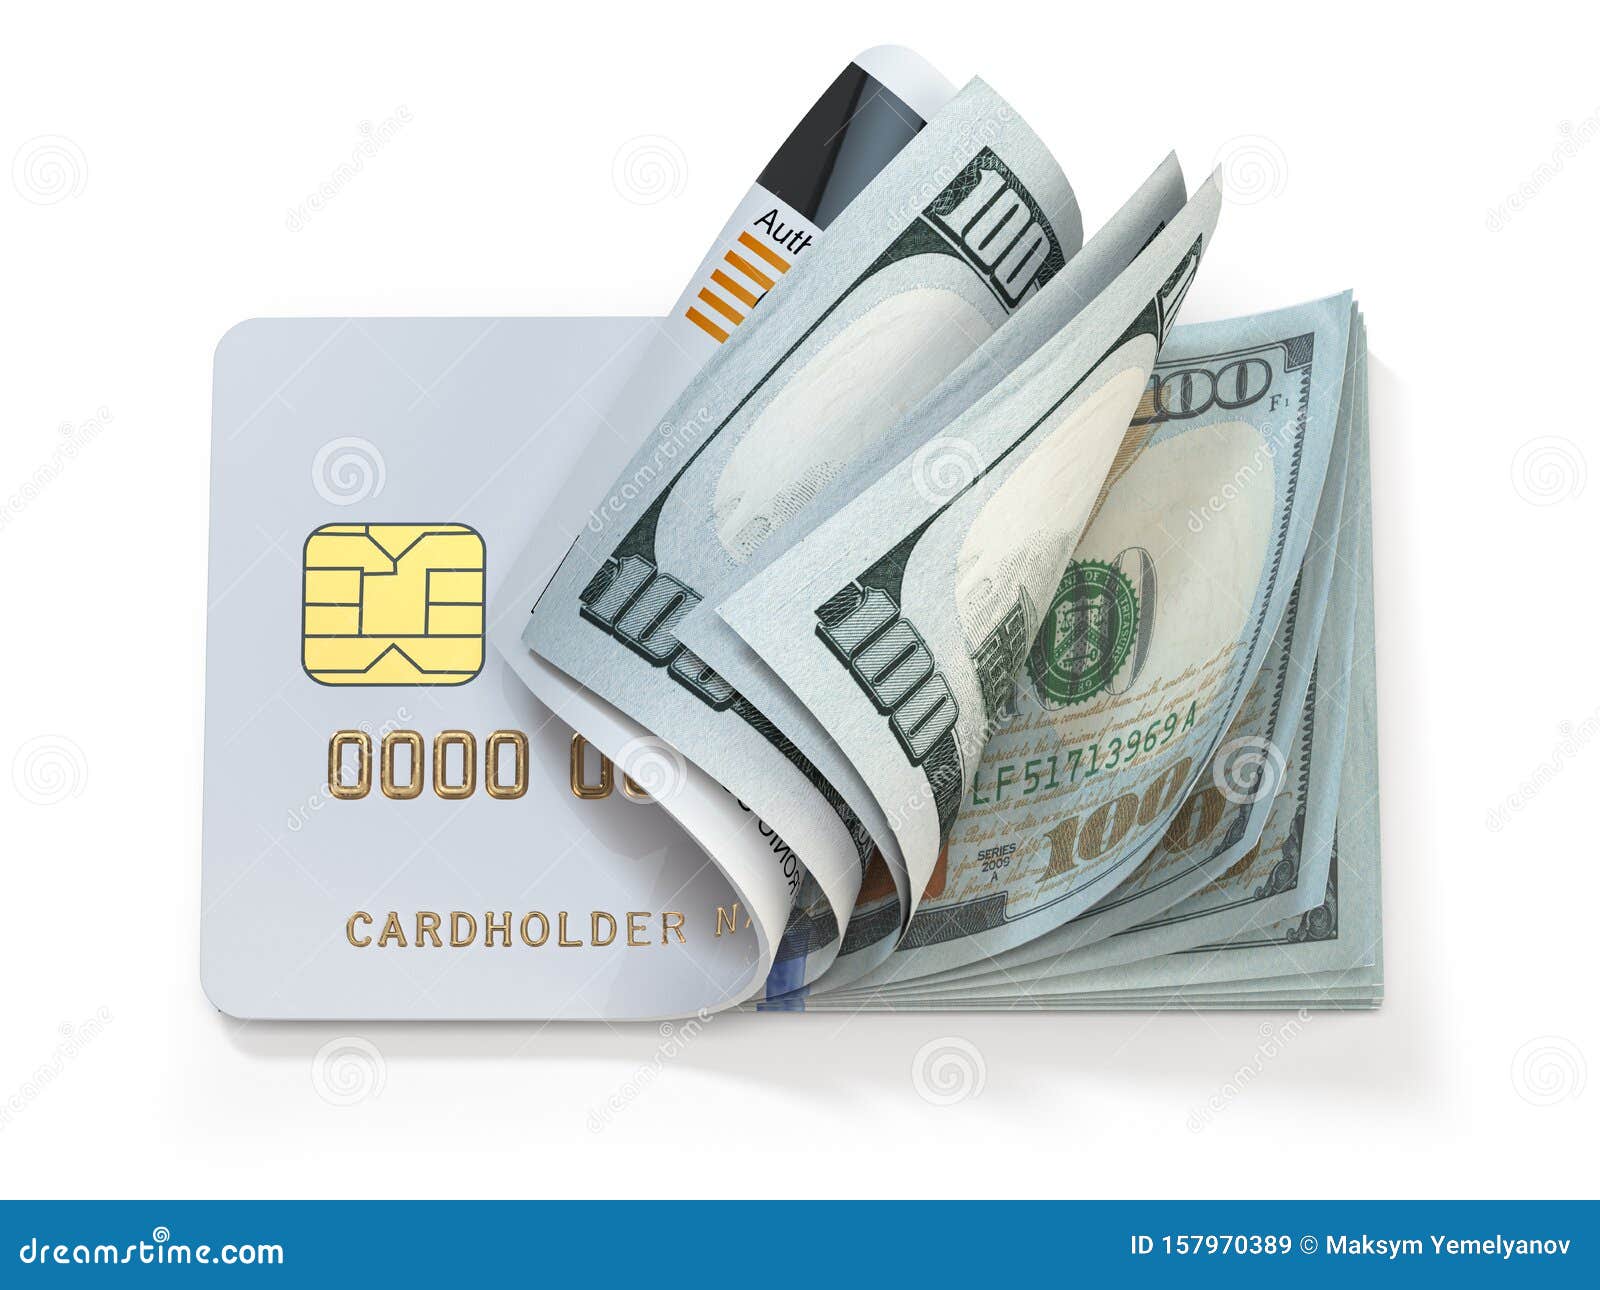 credit card and dollar in cash. banking, shopping concept. opening a wallet or bank account